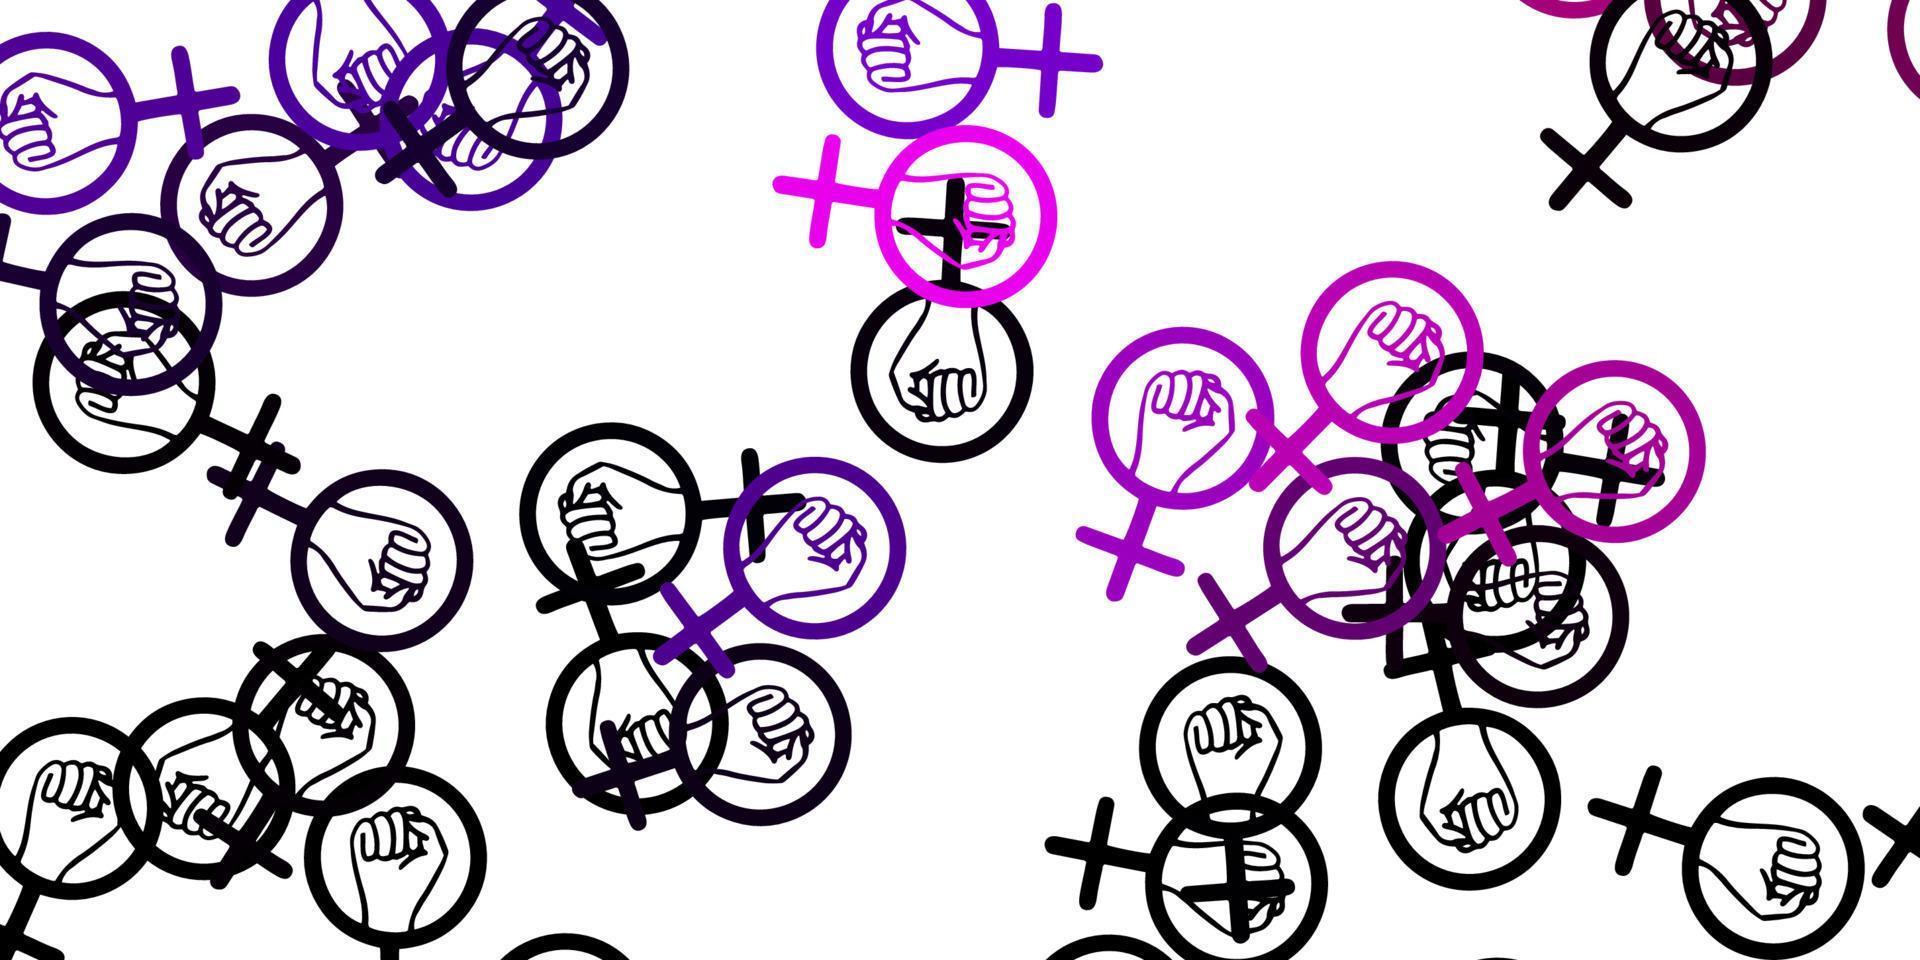 Light Purple vector texture with women's rights symbols.